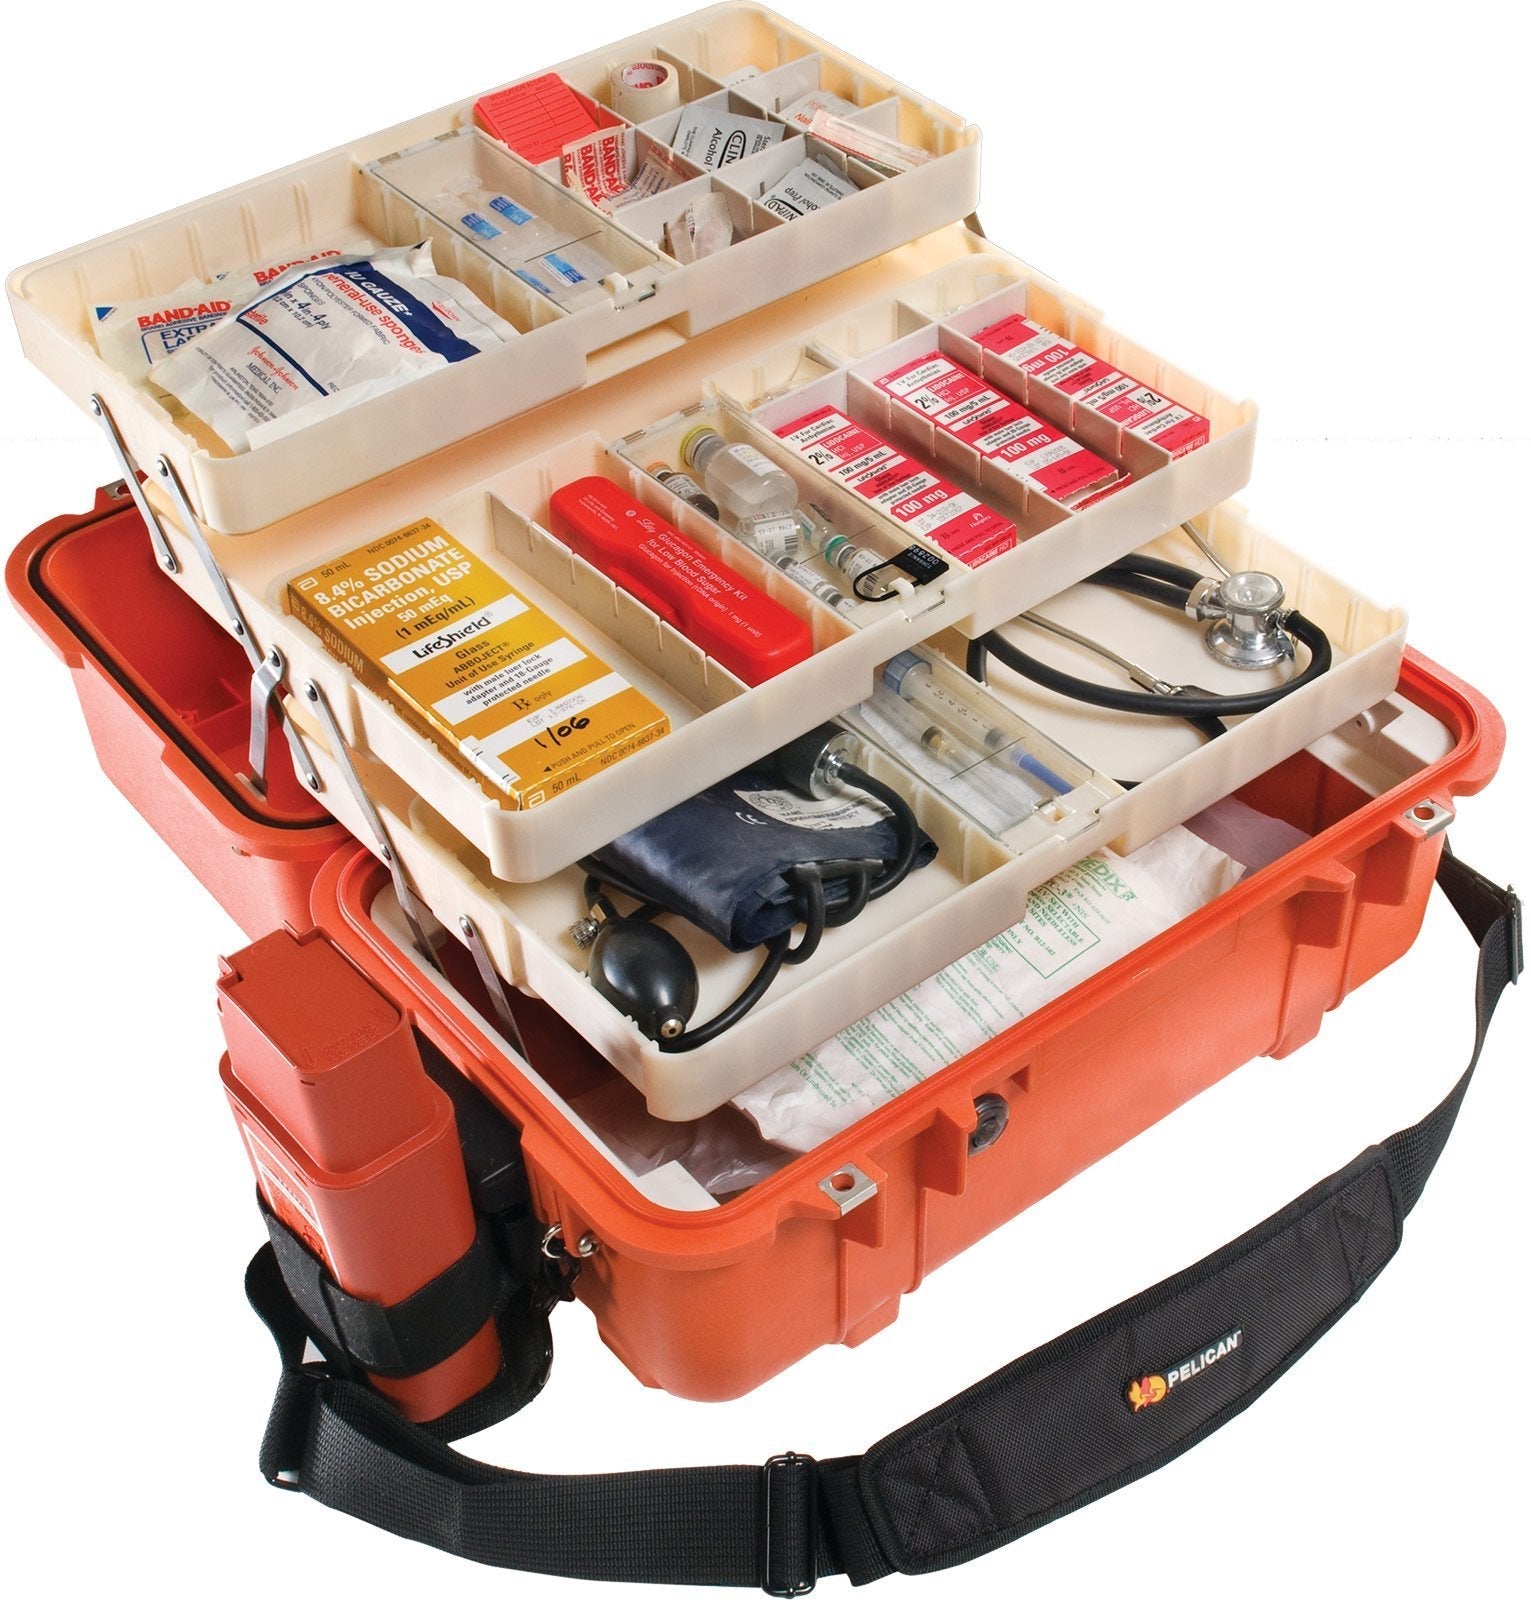 Pelican 1460EMS Protector EMS Case Orange Bags, Packs and Cases Pelican Products Tactical Gear Supplier Tactical Distributors Australia